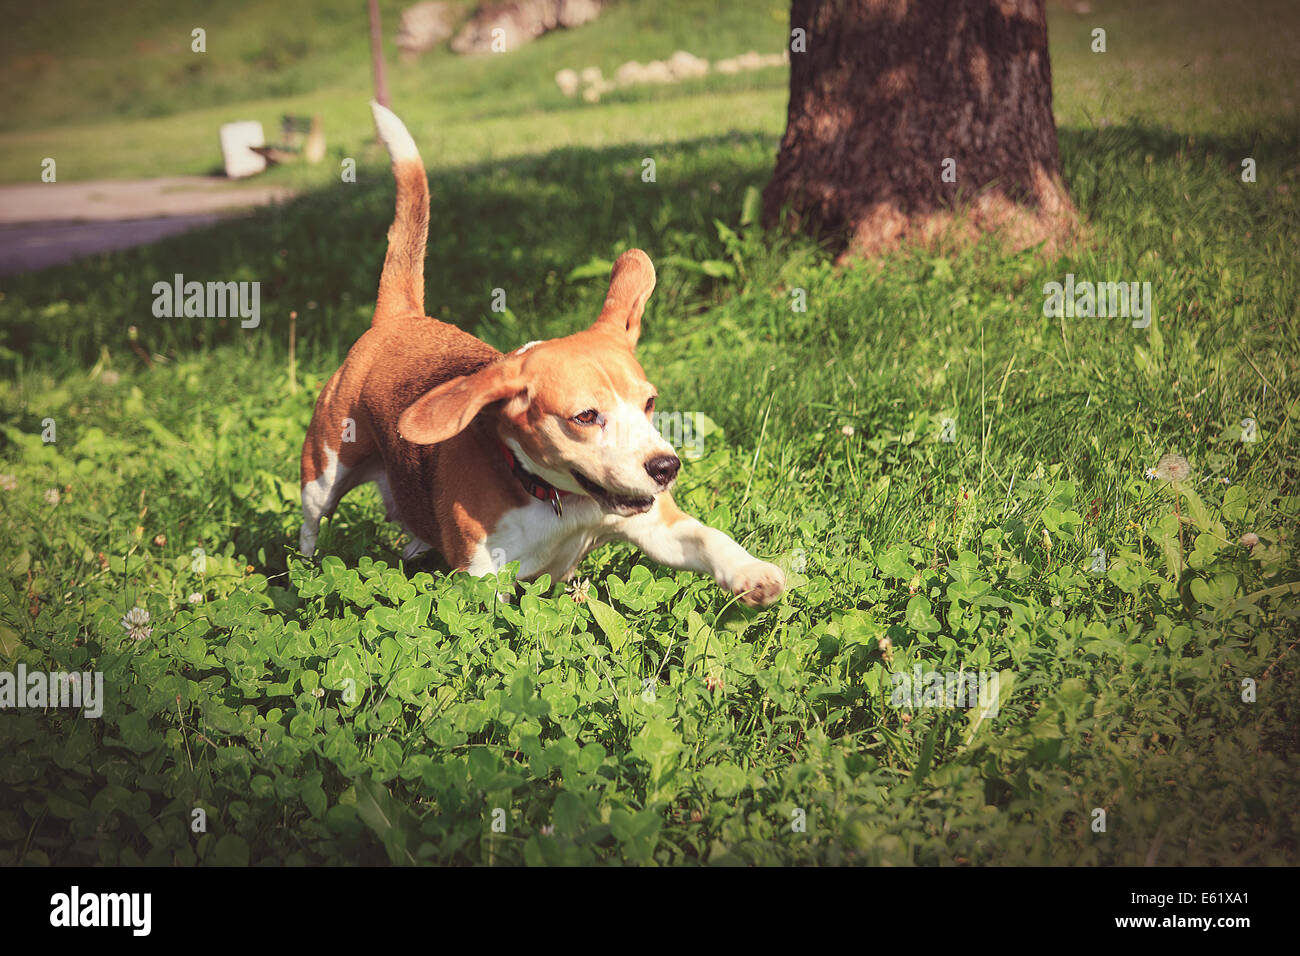 Happy beagle puppy dog in playing pose in park running through green grass Stock Photo